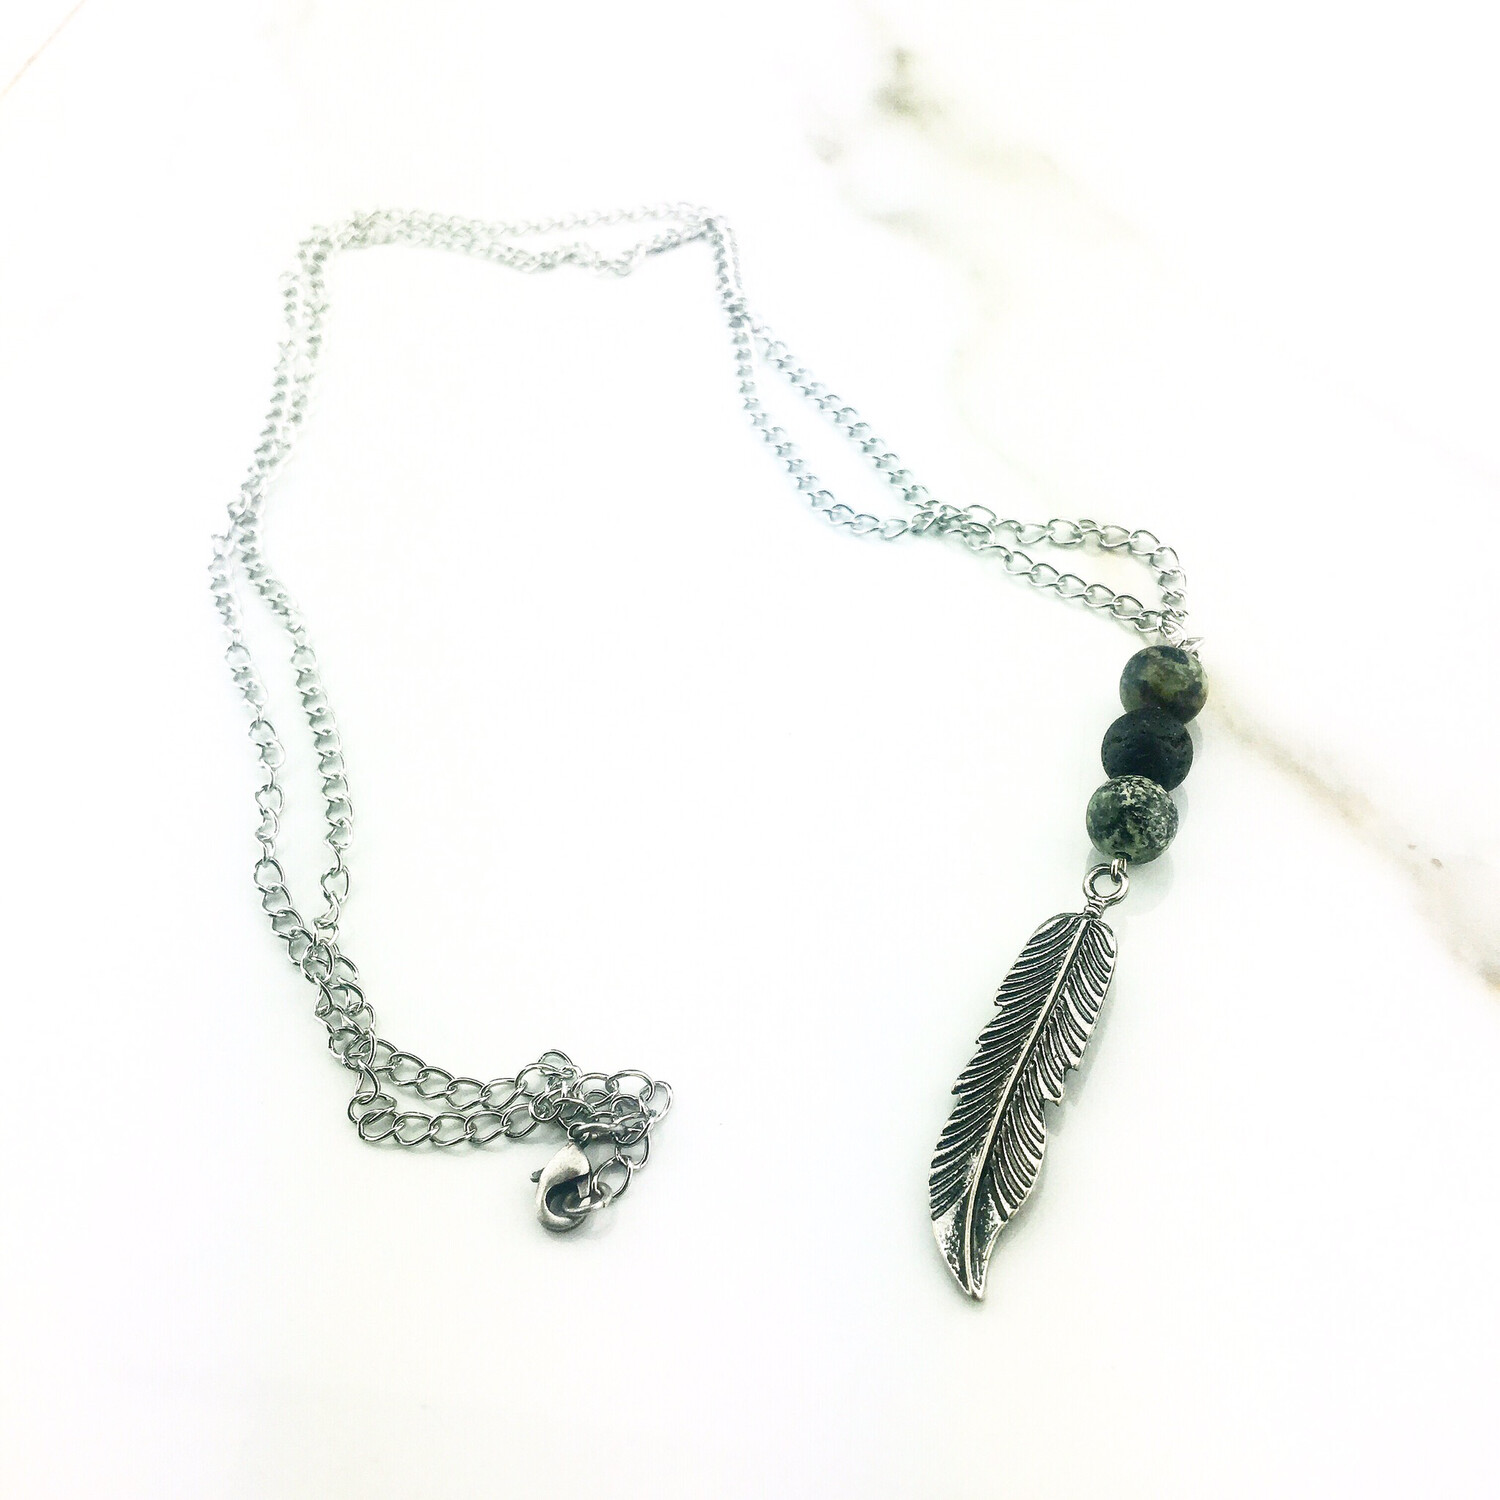 Three Bead Silver Diffuser Necklace With African Bead